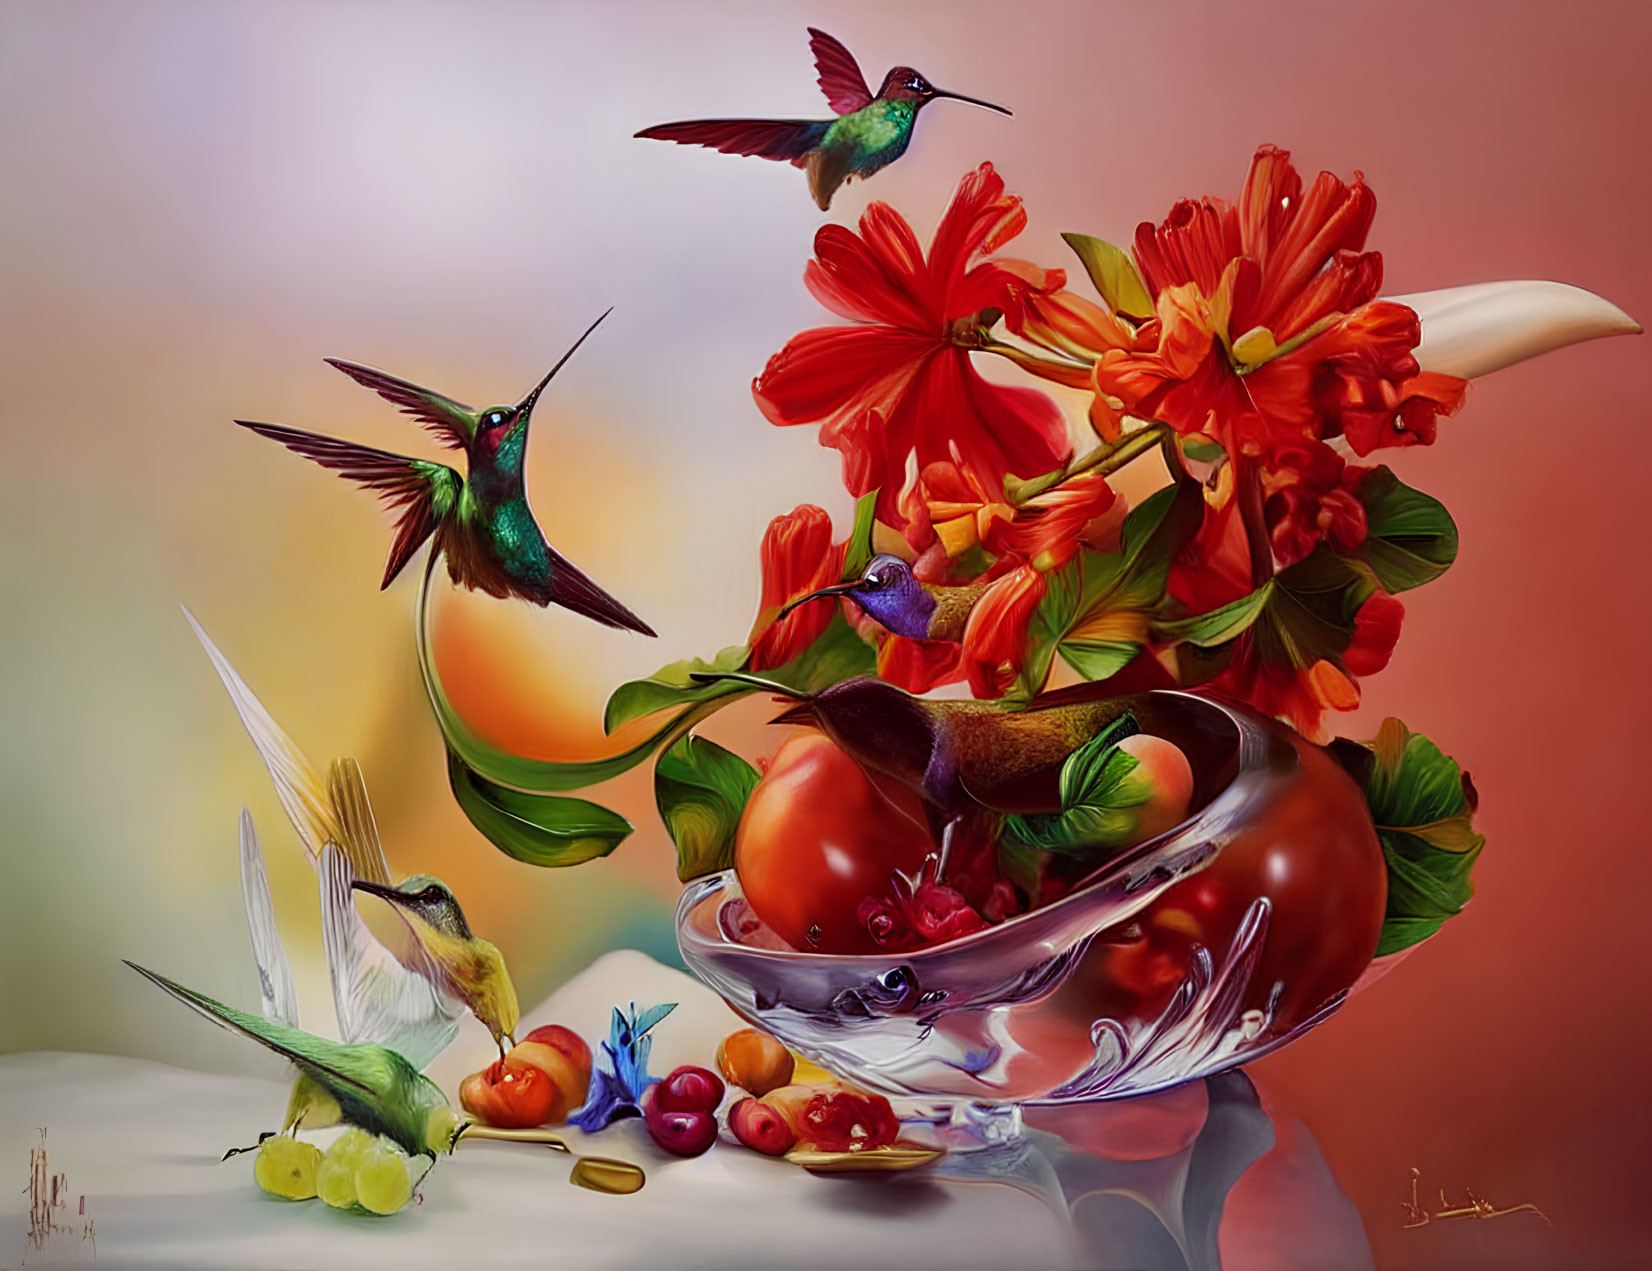 Colorful Still Life with Hummingbirds, Glass Bowl, Cherries, and Red Flowers